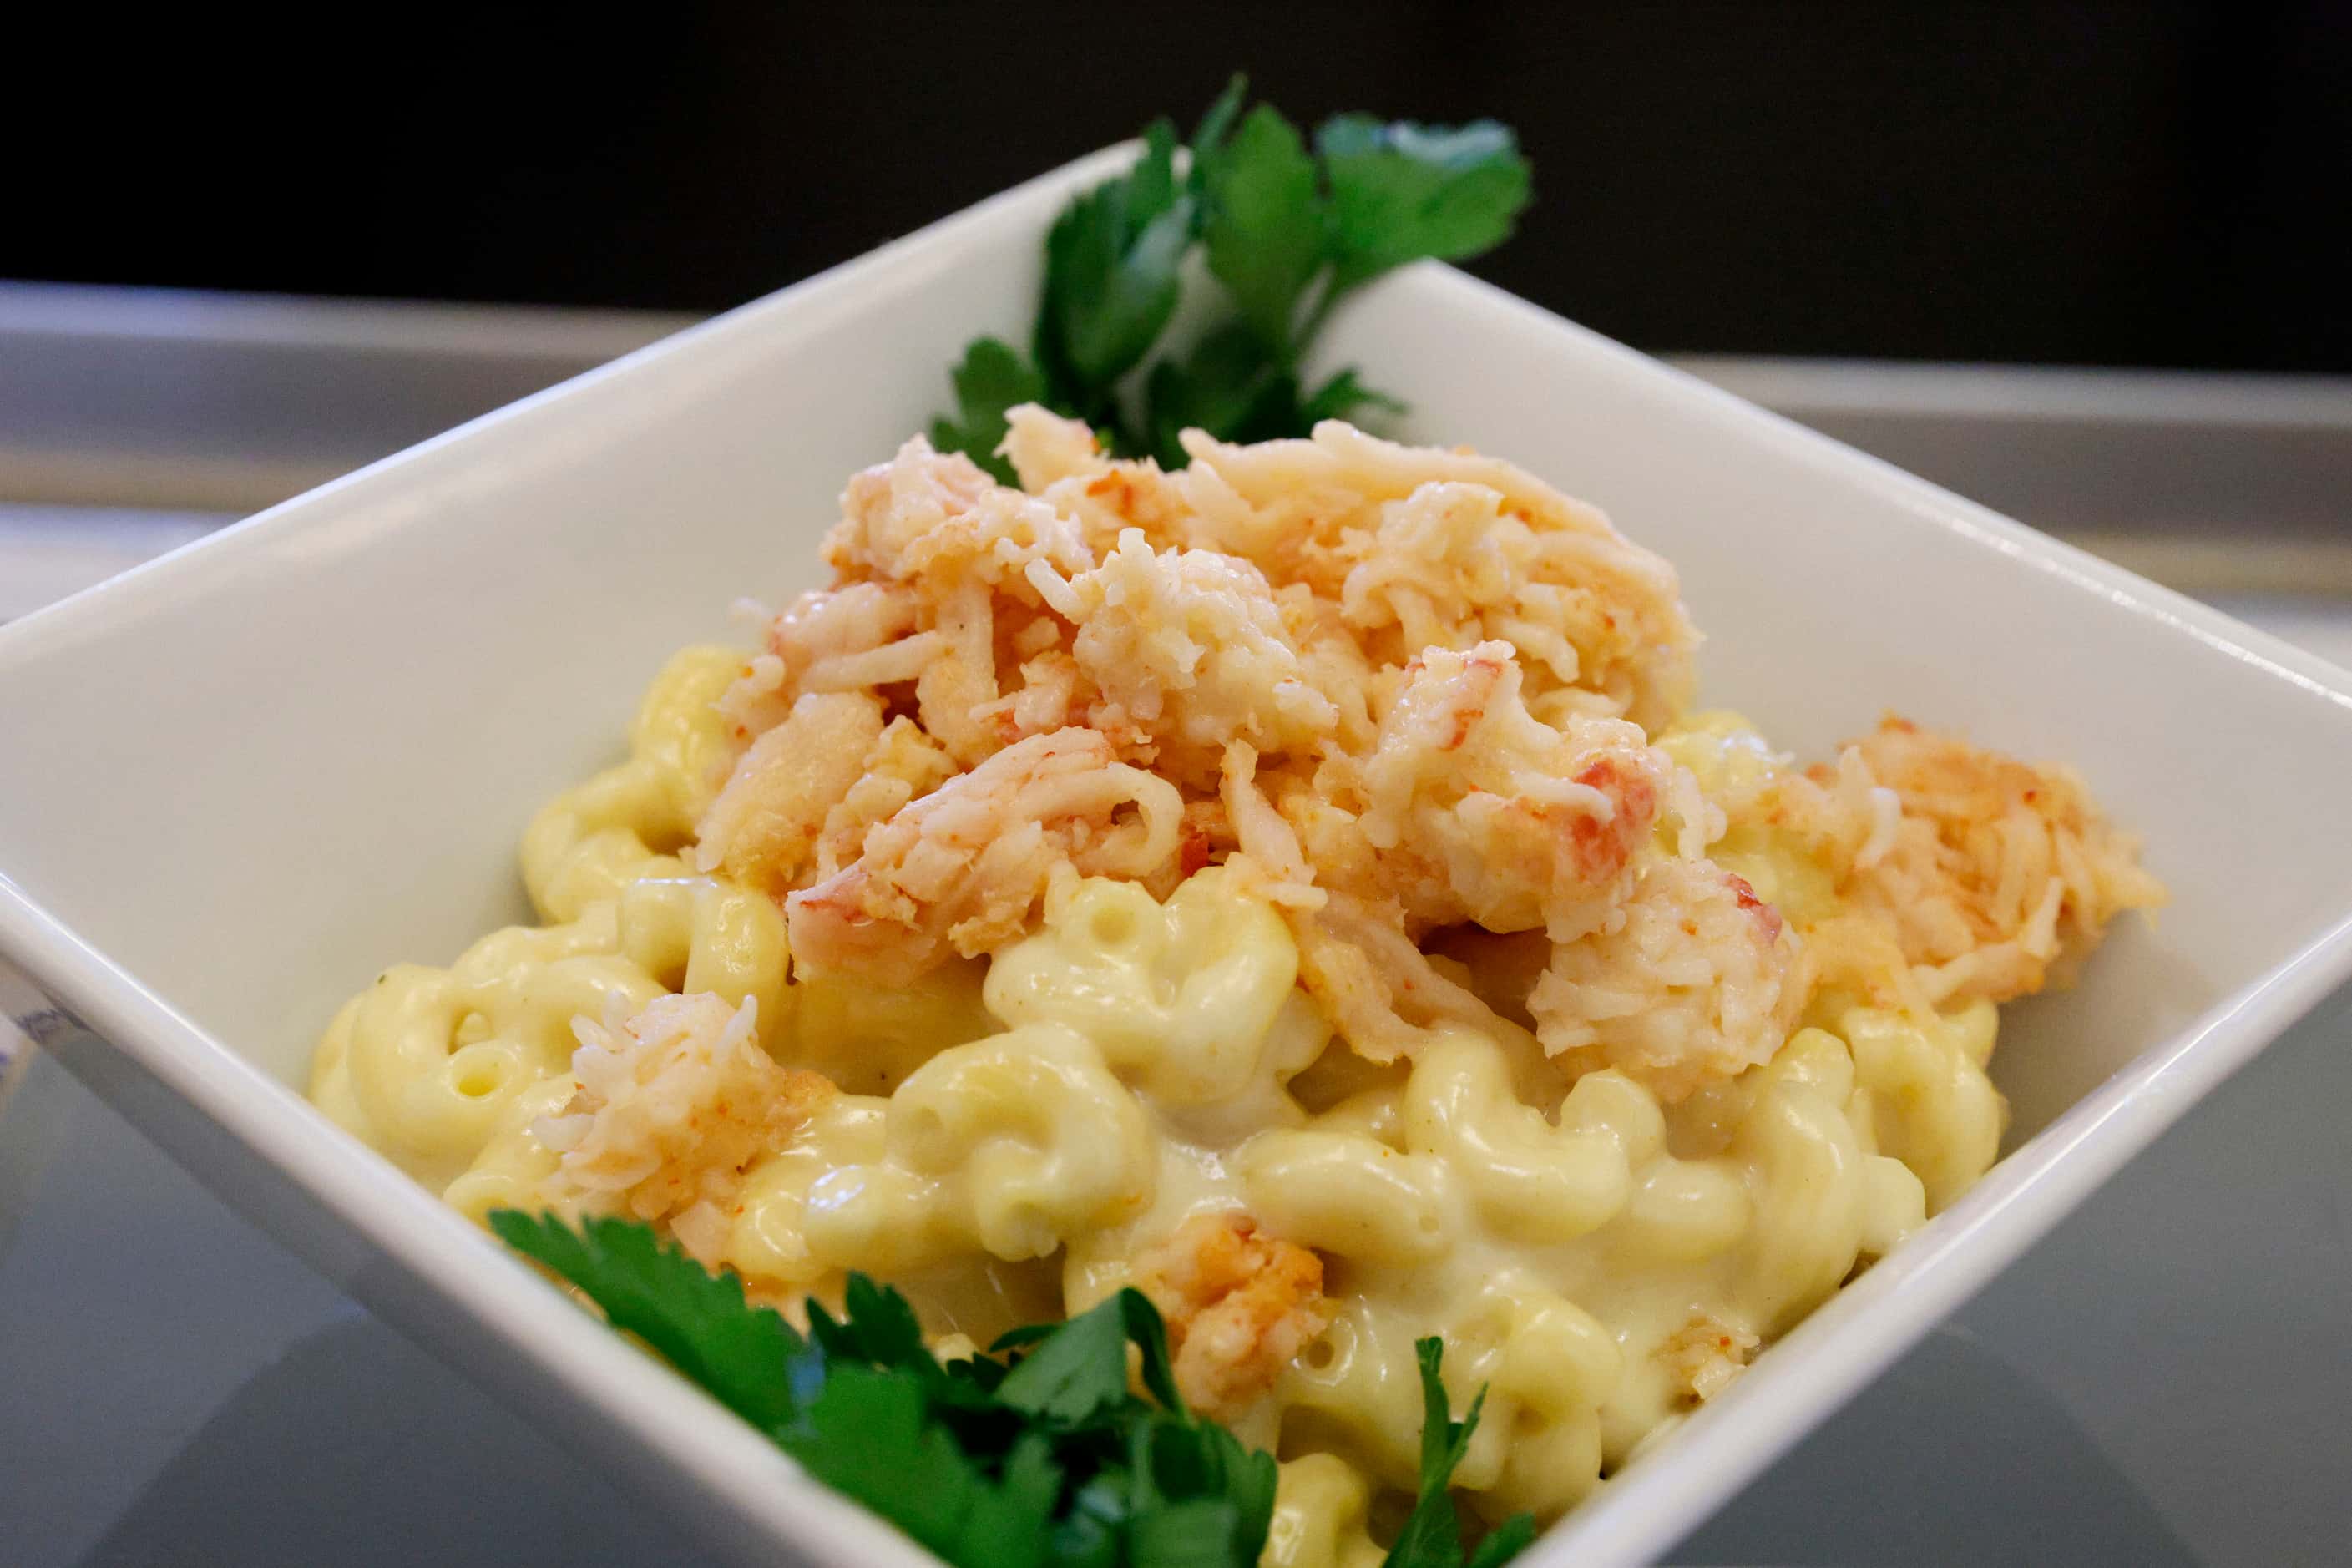 Lobster mac and cheese joins the menu for the Dallas Cowboys 2022-2023 NFL season pictured...